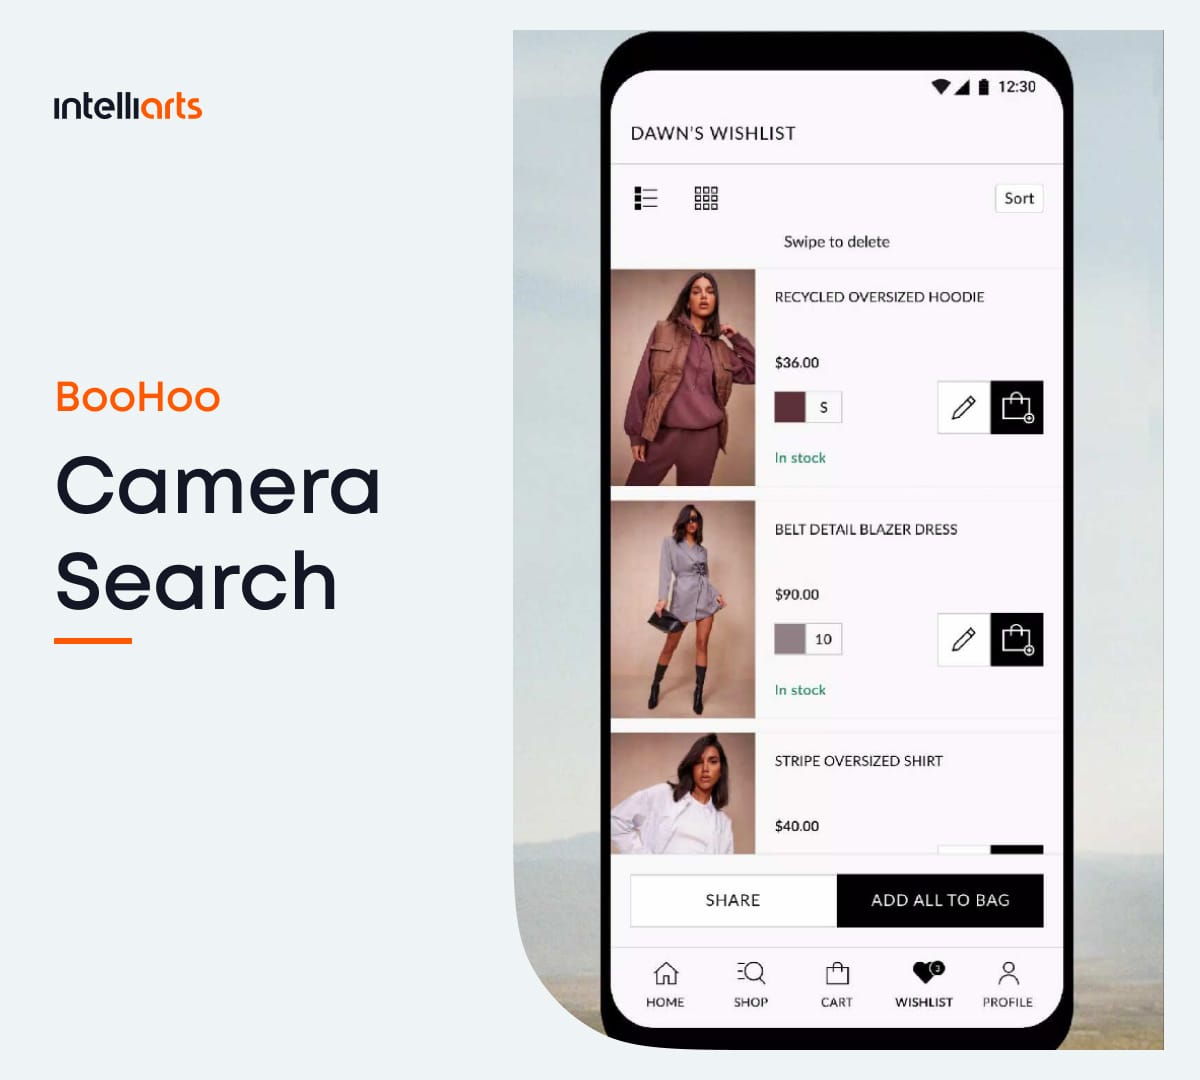 Camera Search visual search functionality by BooHoo